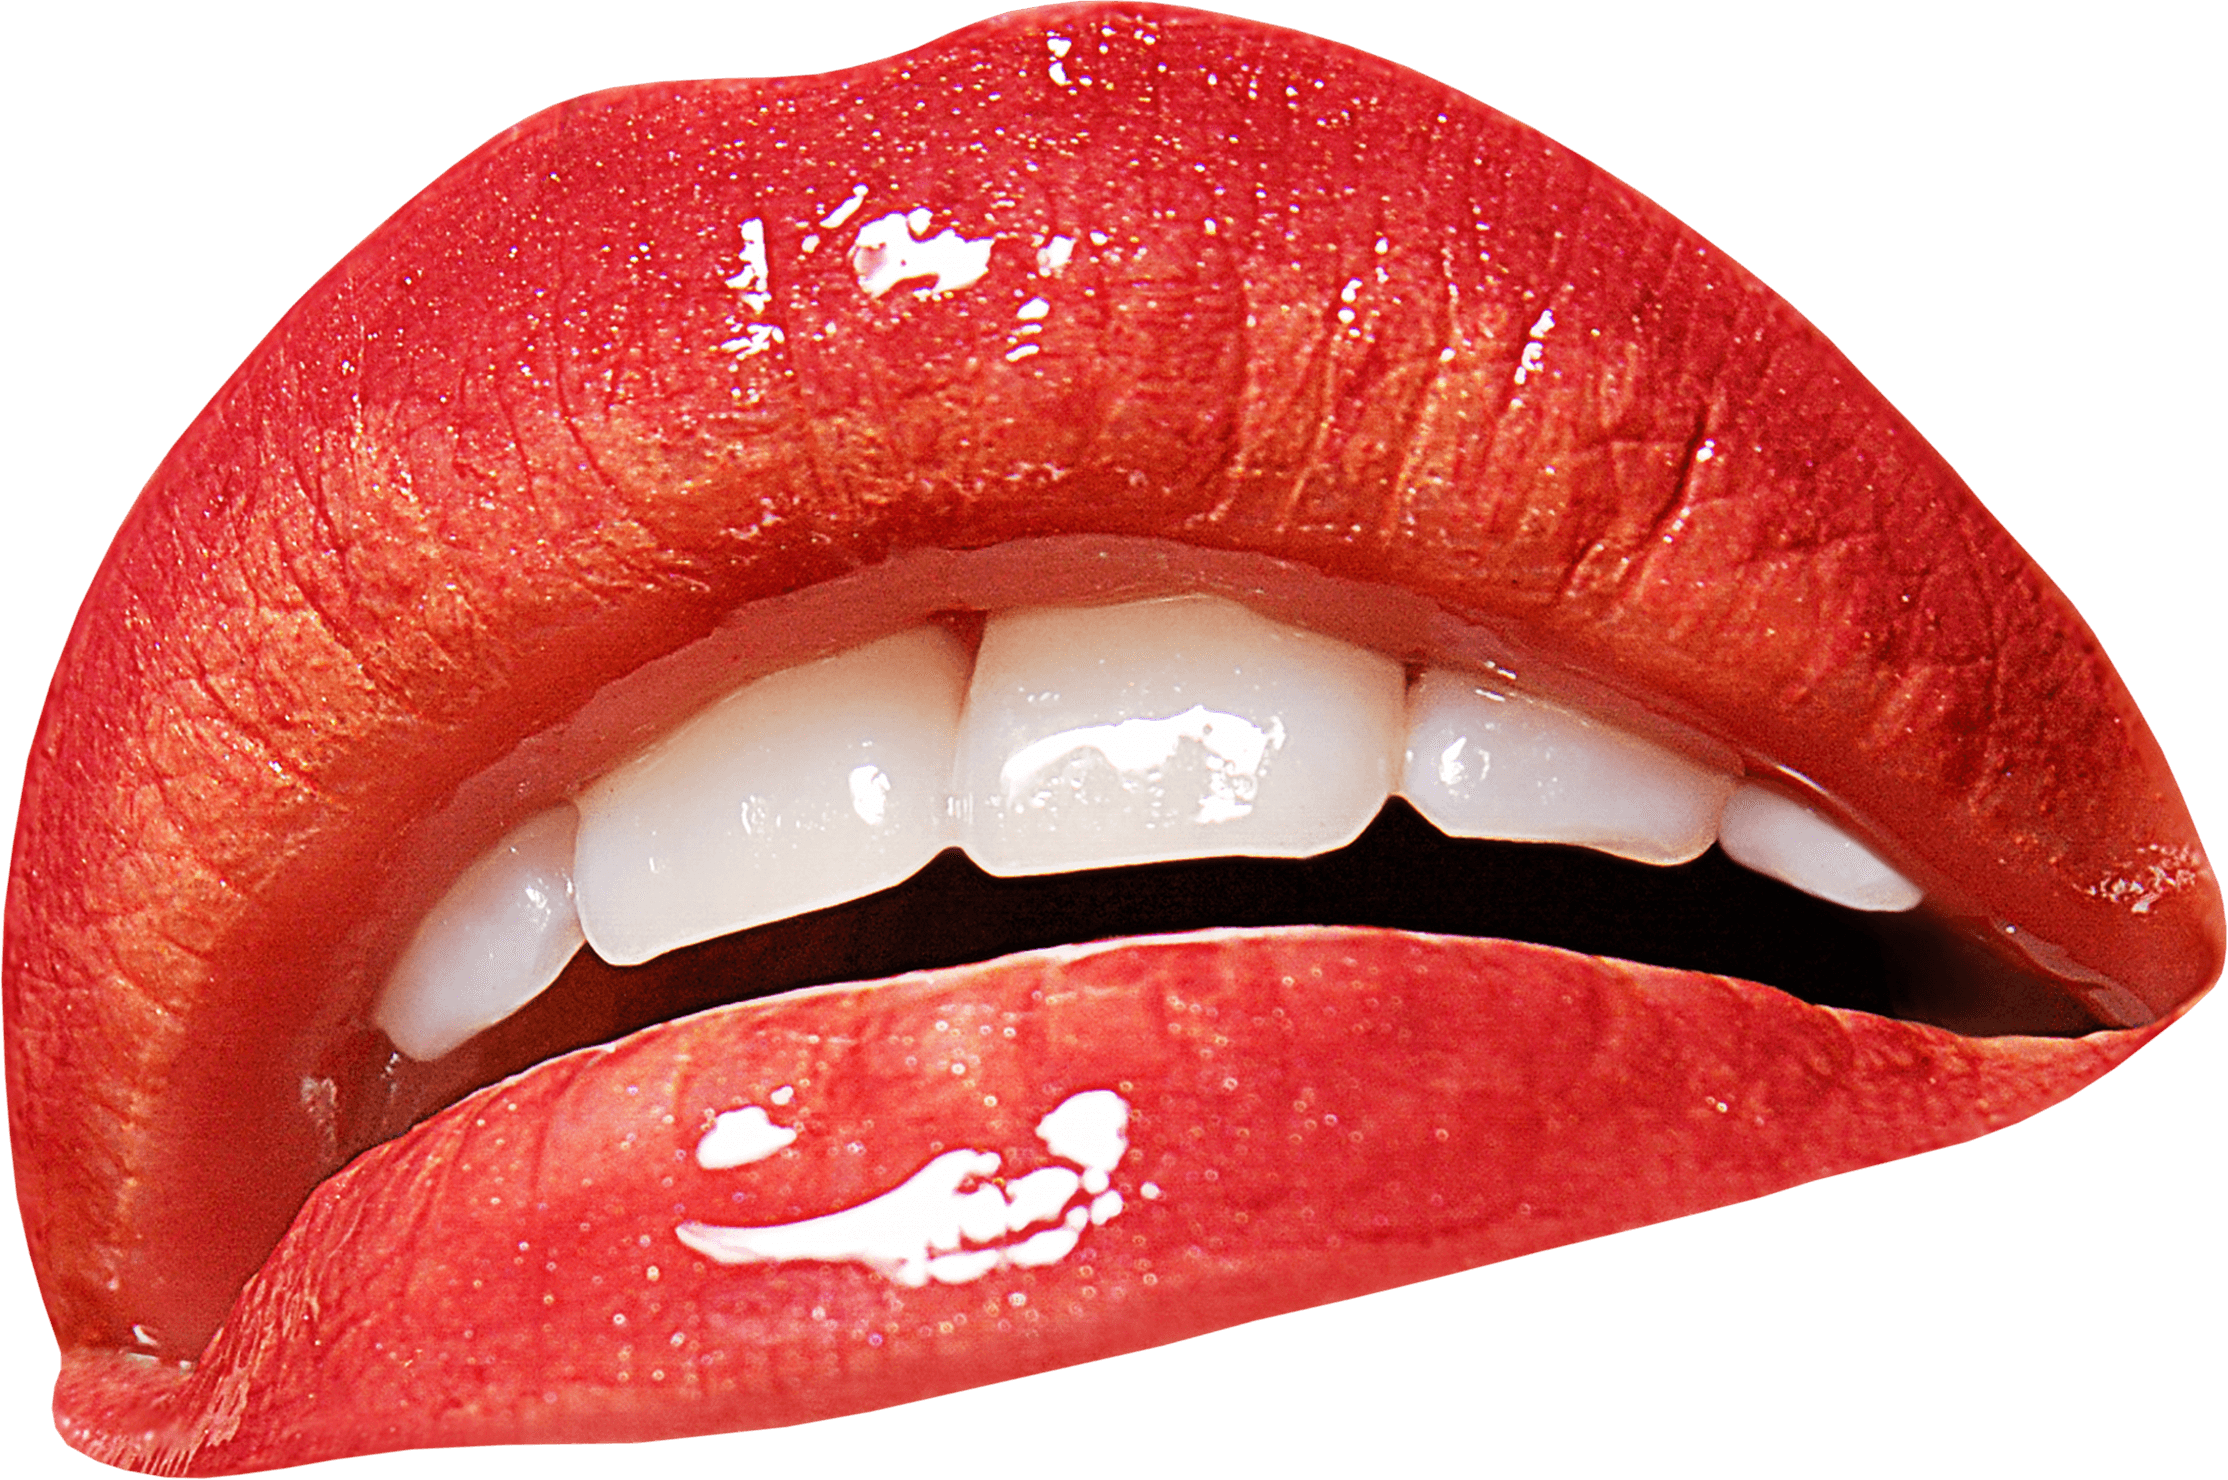 Glossy Red Lips Closeup.png